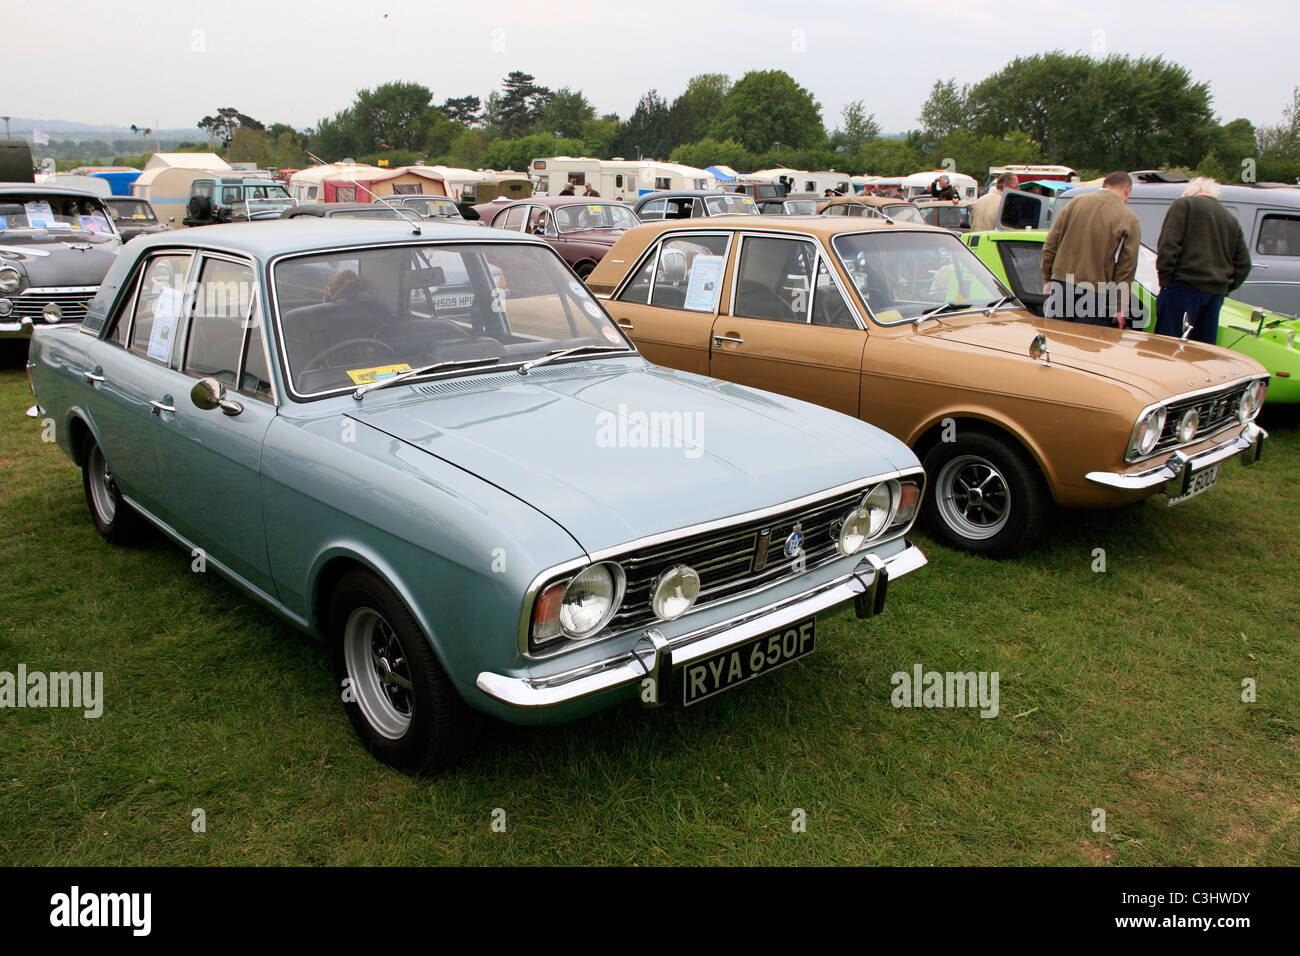 A vintage 1960s English Ford Cortina Mk2 cars Stock Photo - Alamy